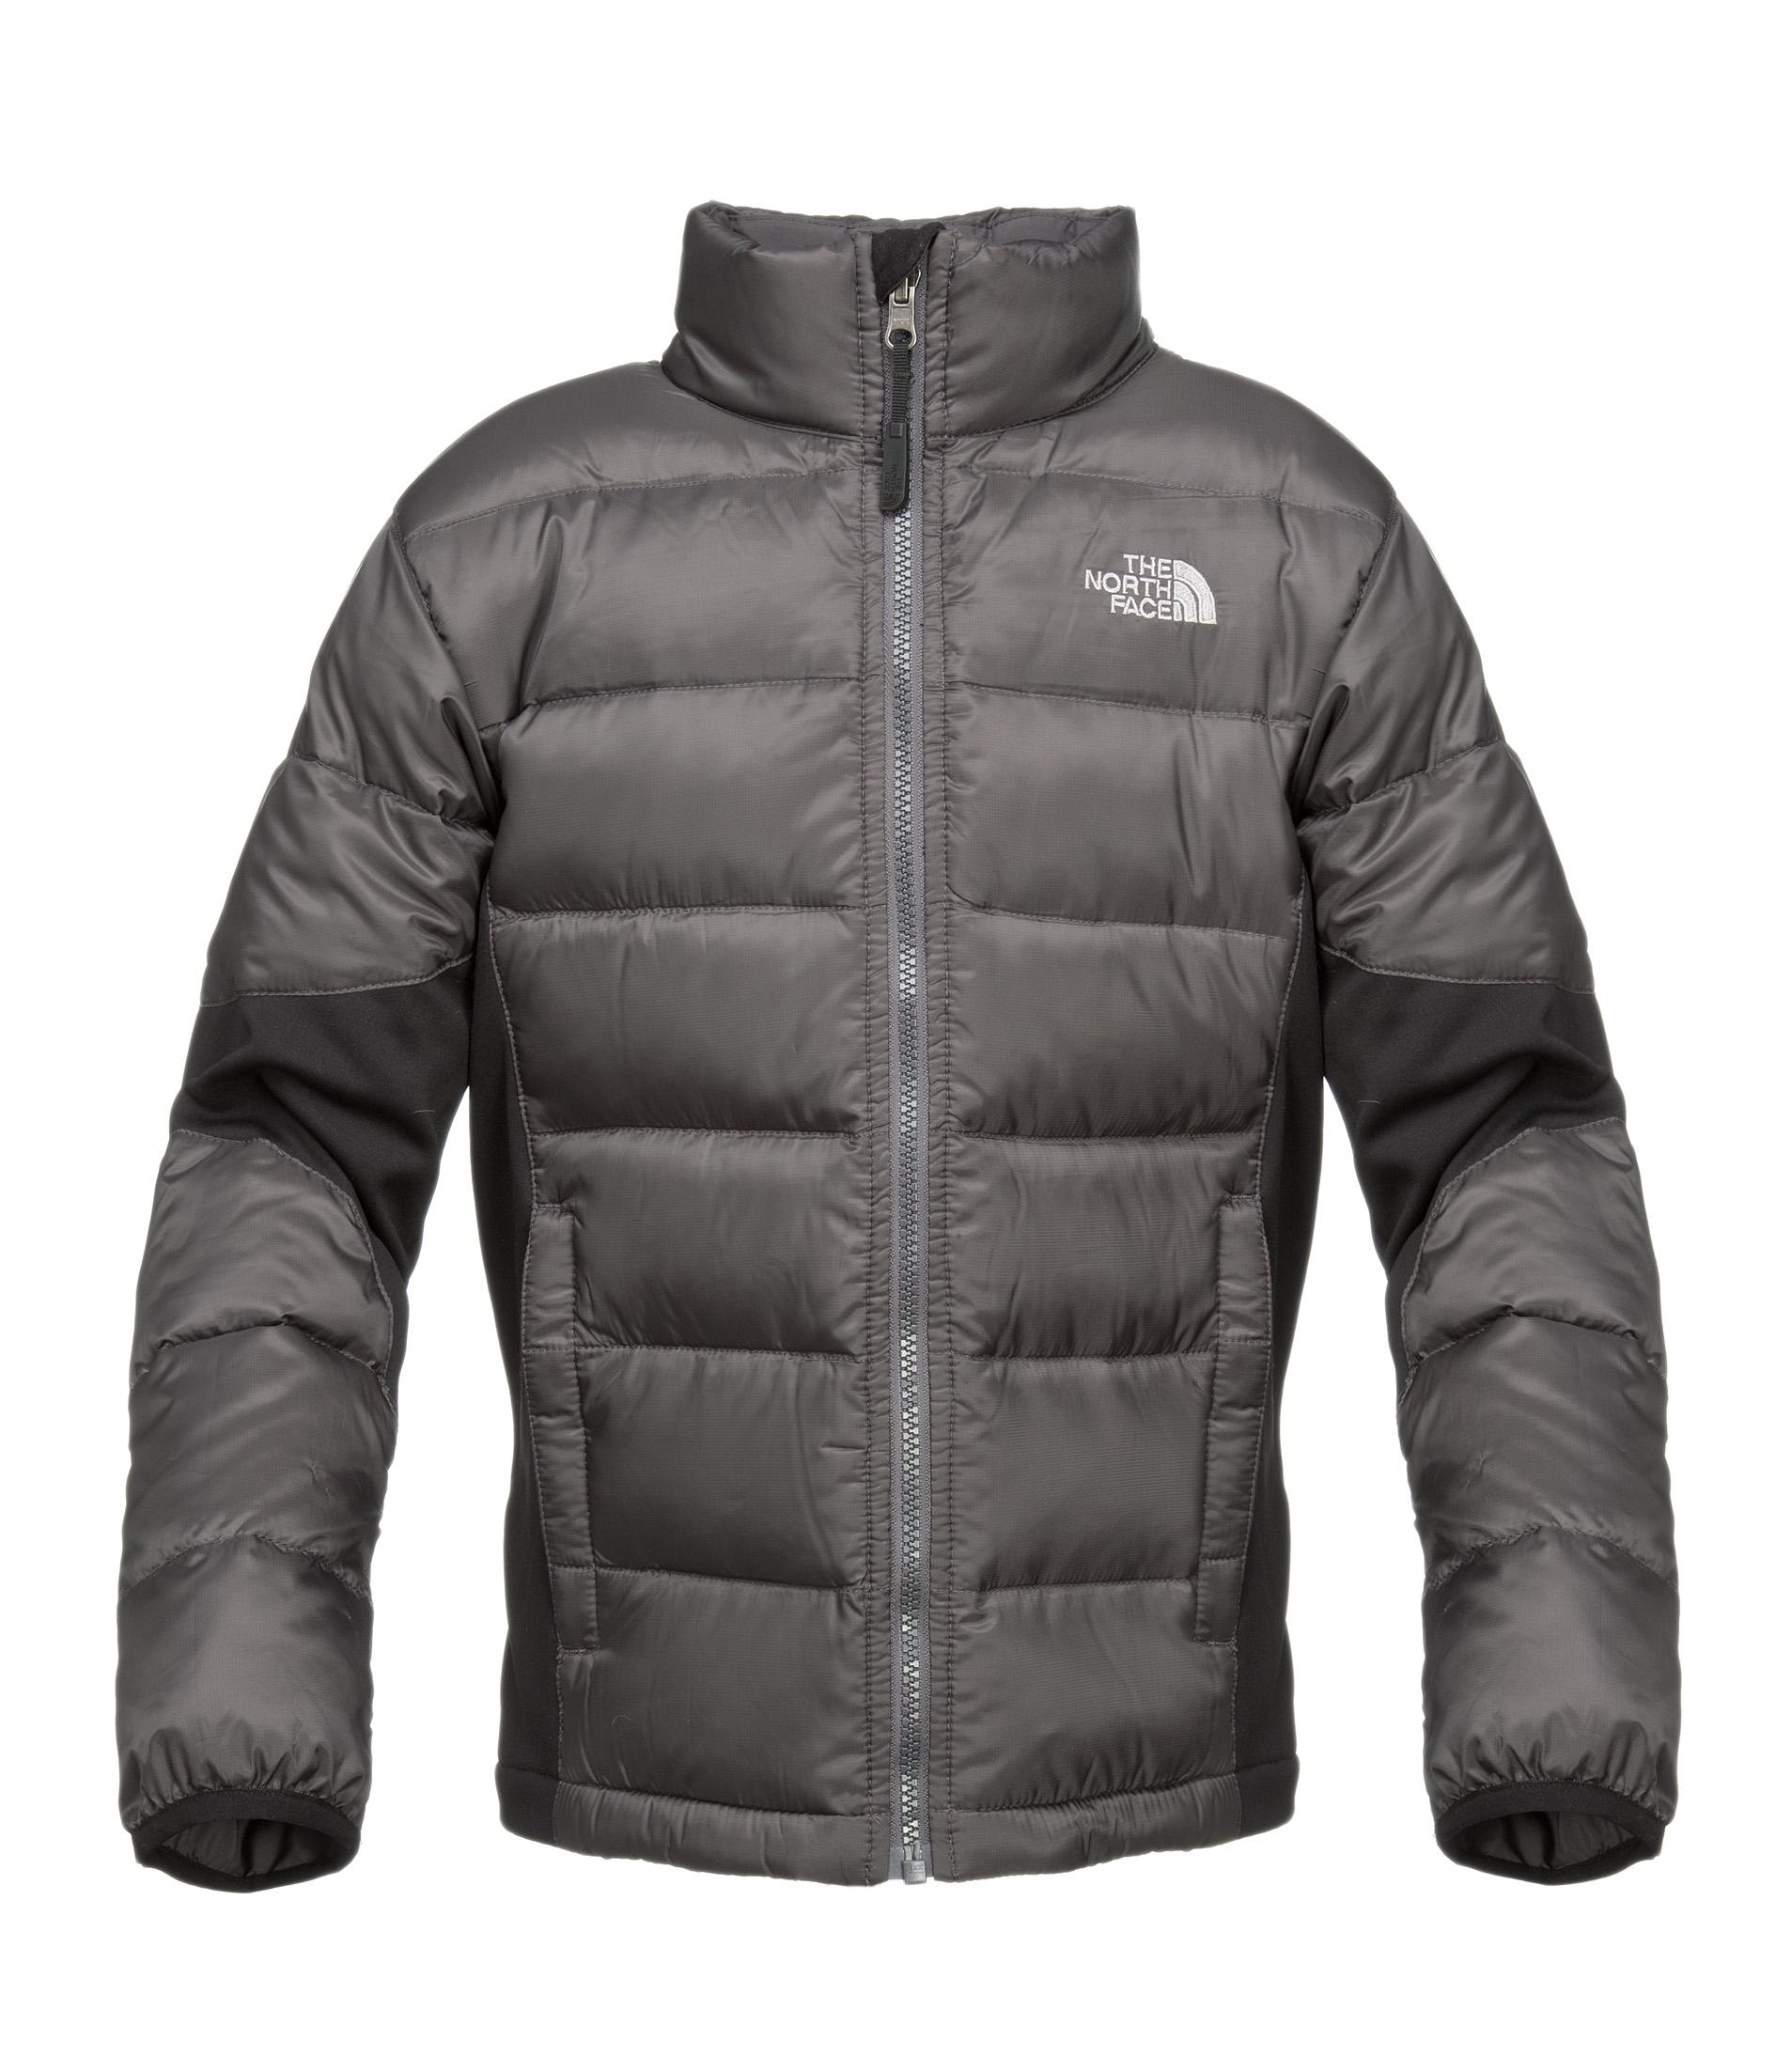 Foto The North Face Boys' Lil' Crympt Jacket foto 47468